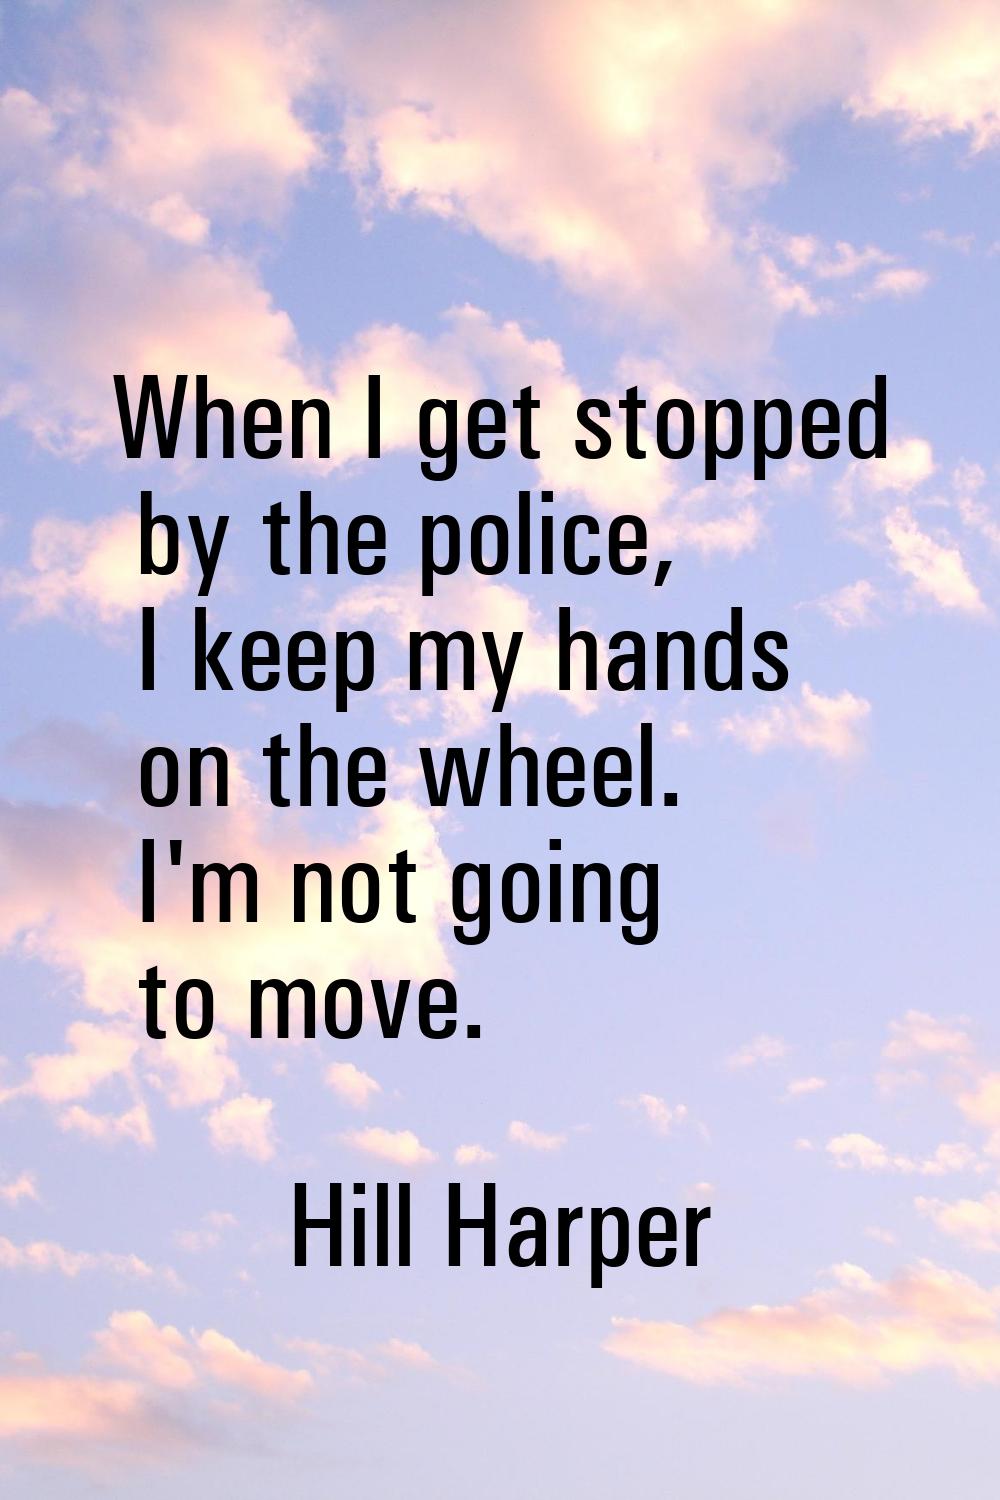 When I get stopped by the police, I keep my hands on the wheel. I'm not going to move.